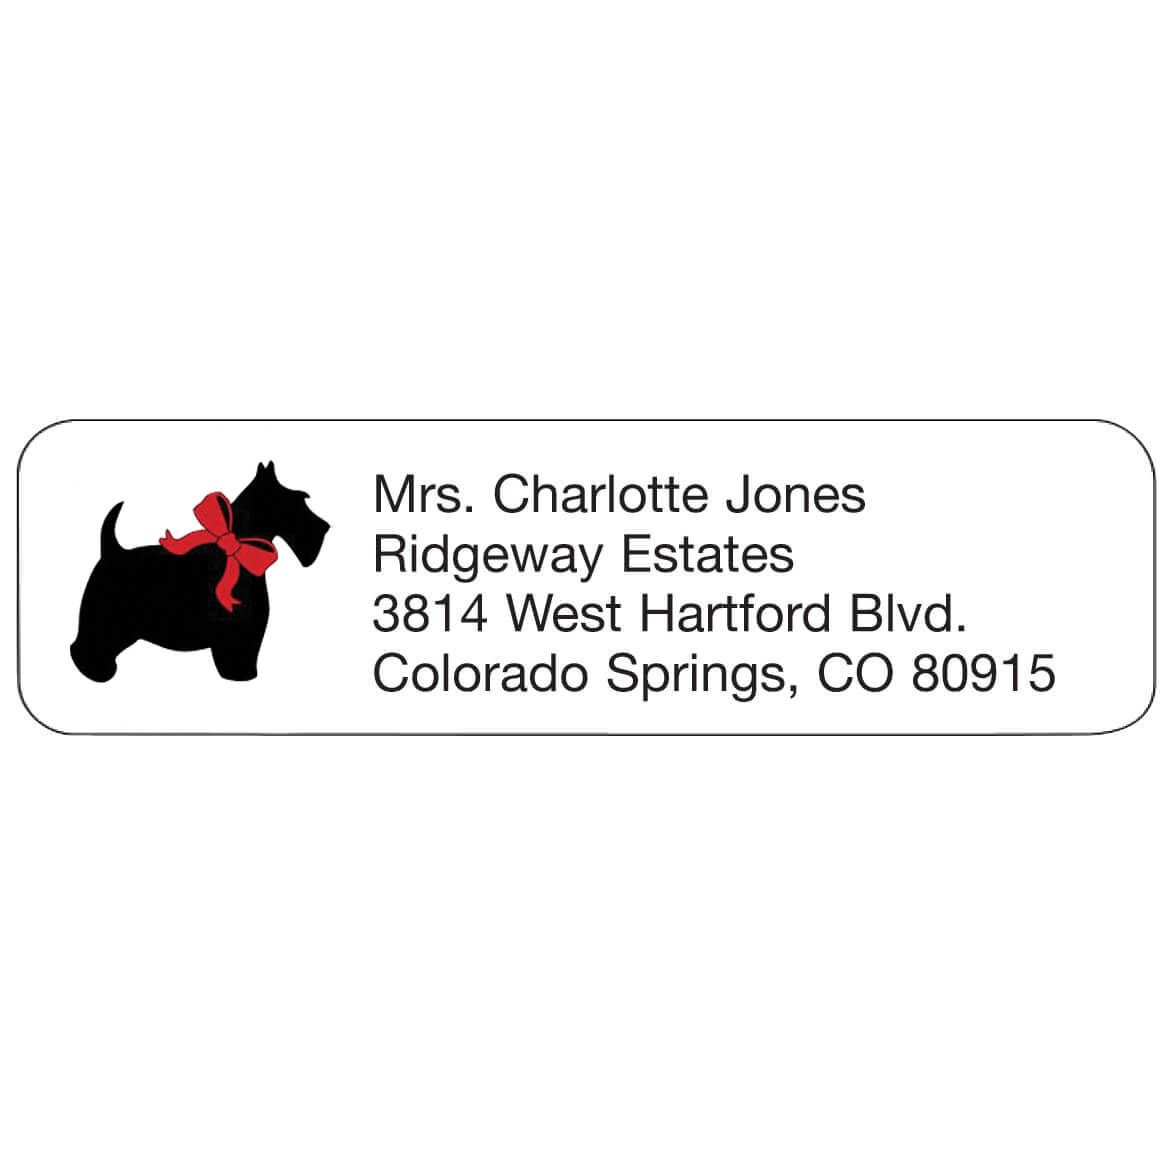 Scottish Terrier Personalized Address Labels + '-' + 341420